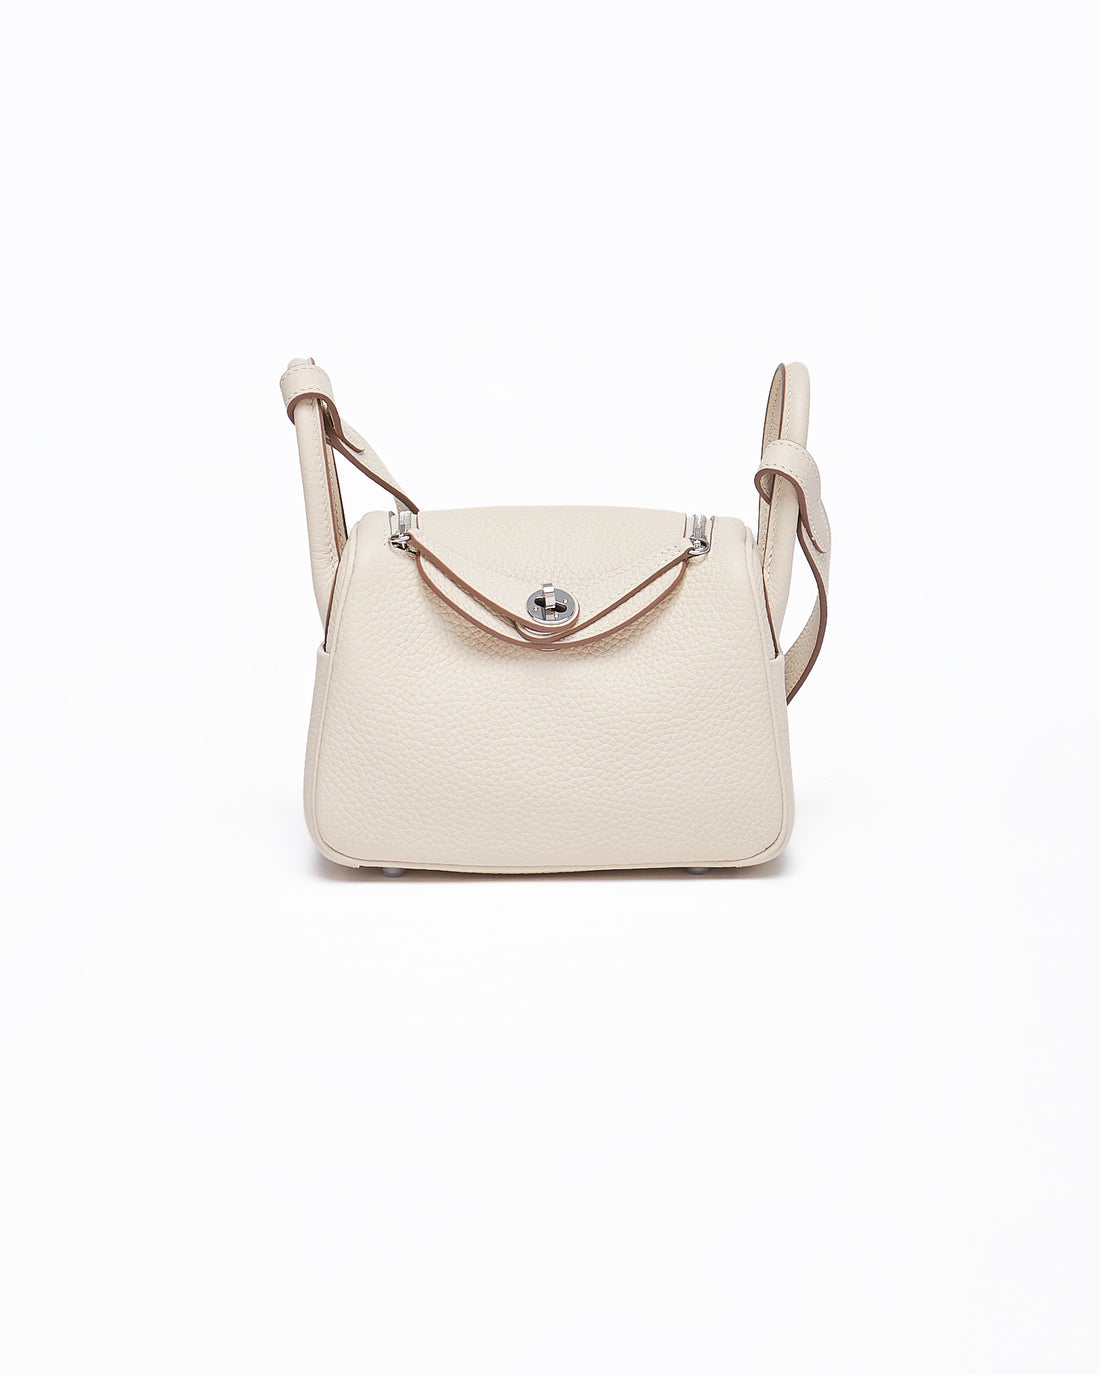 Hermes Mini Lindy Lady Bag 95.90 - MOI OUTFIT